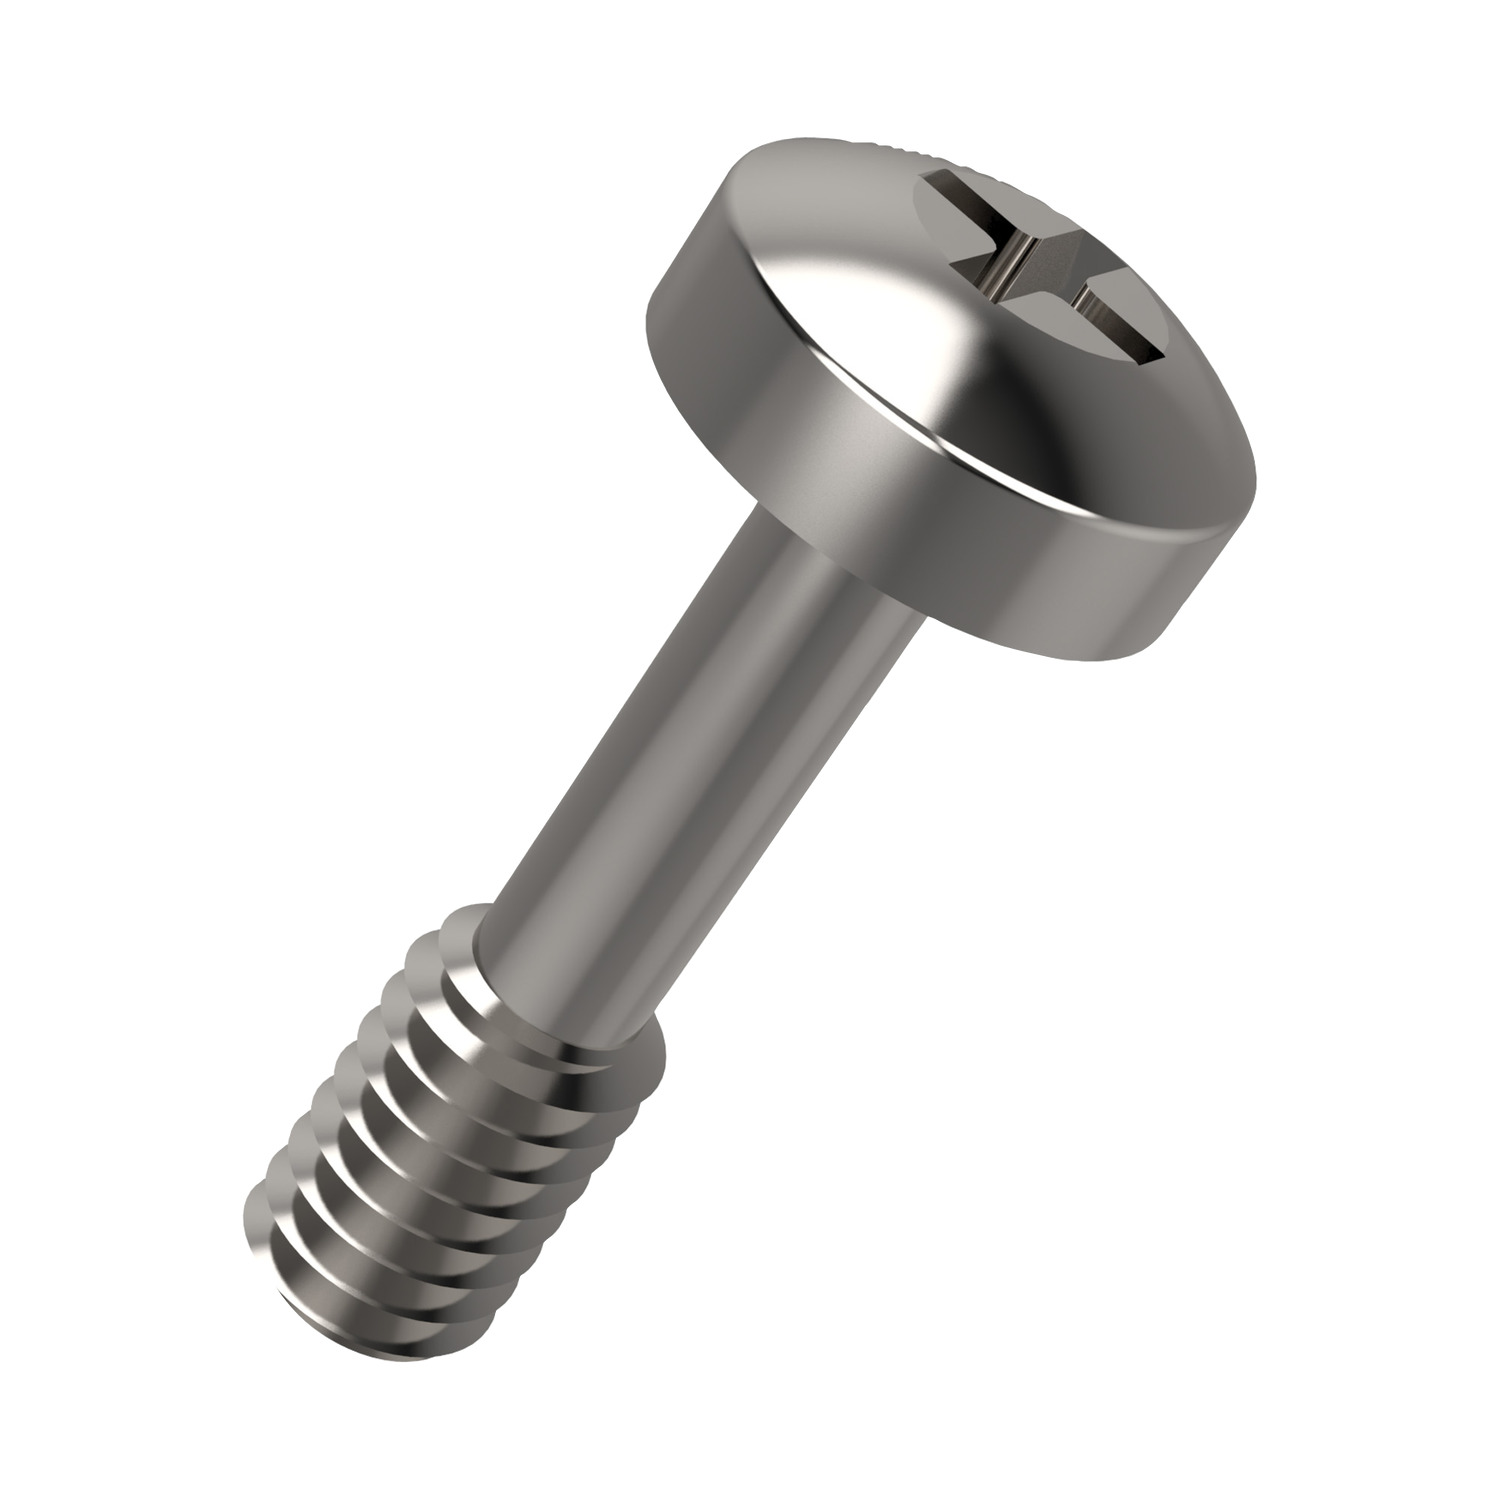 Product P0157.A2, Captive Screws - Pan Head phillips drive, 303 stainless / 